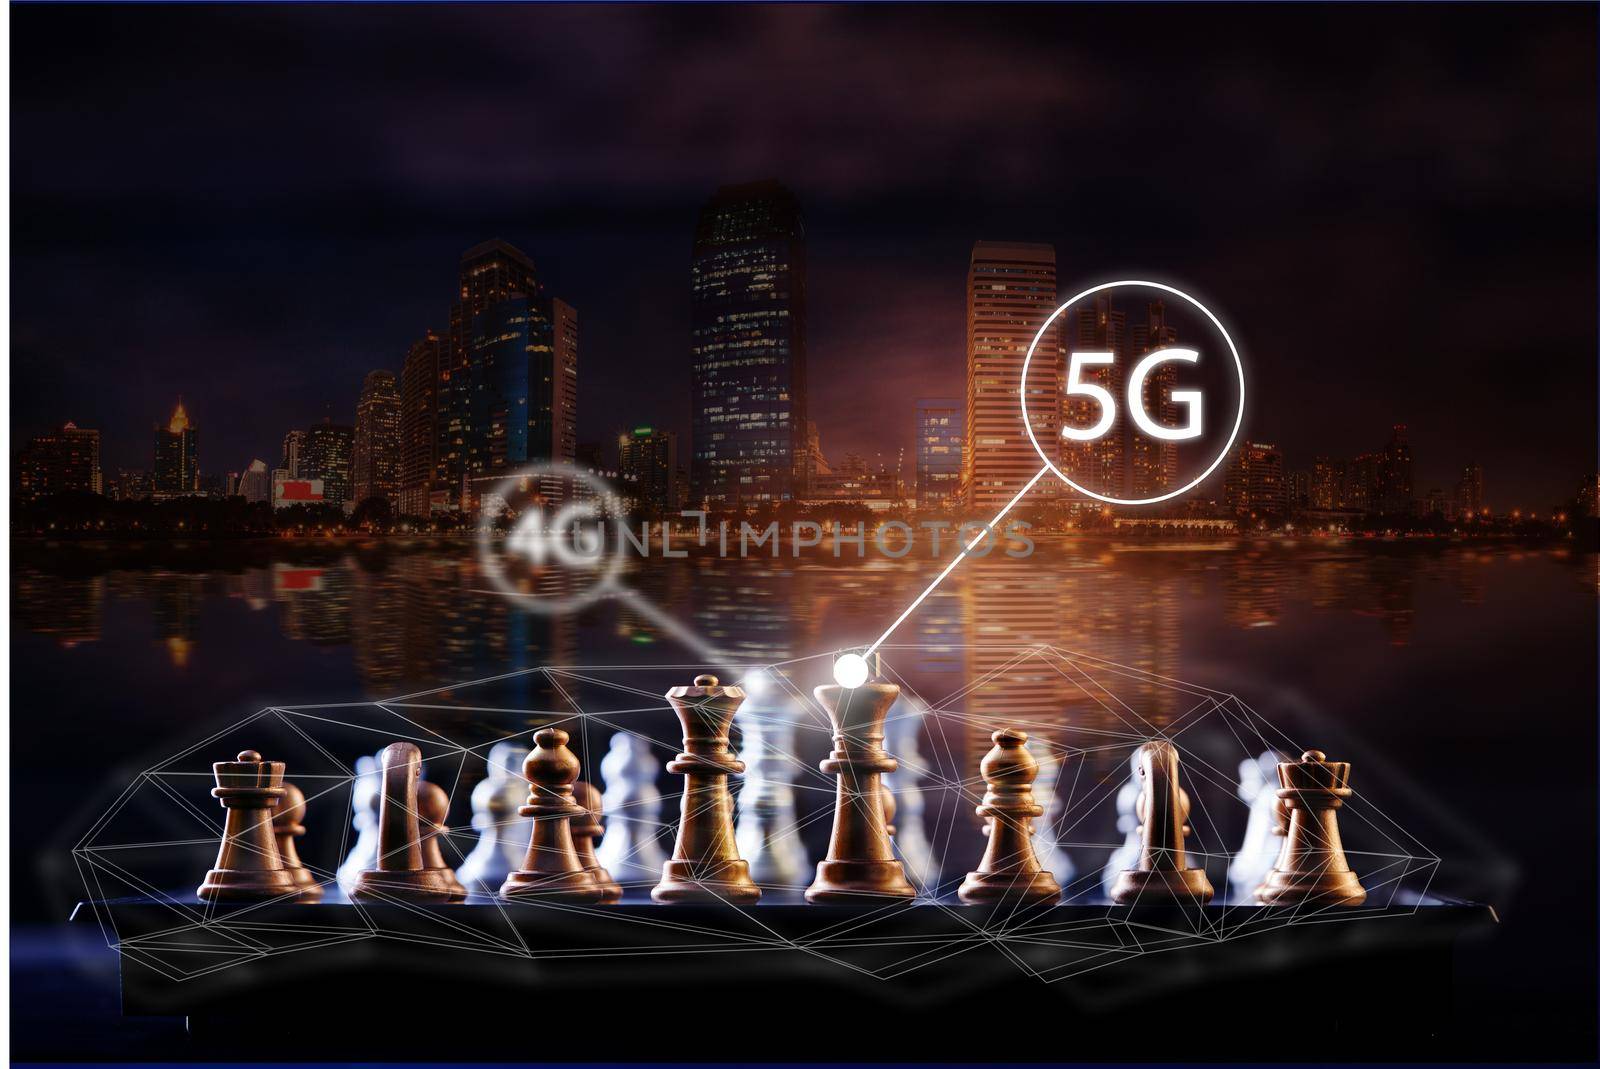 Transfer 4g to 5g concept change of internet connection technology. Chess piece competition concept

